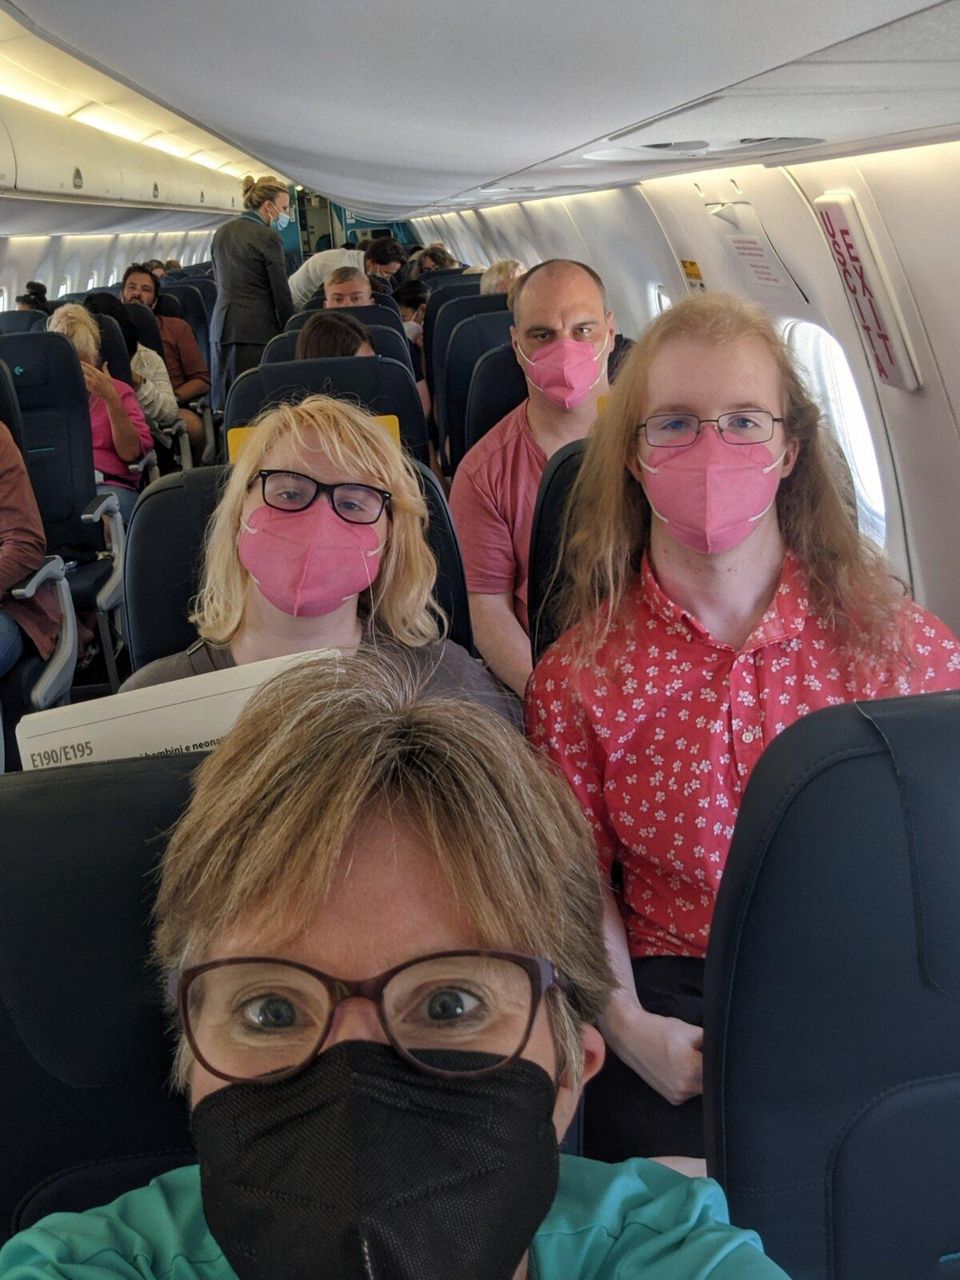 Europe Trip #2 – July 2, 2022 – On The Plane To Munich